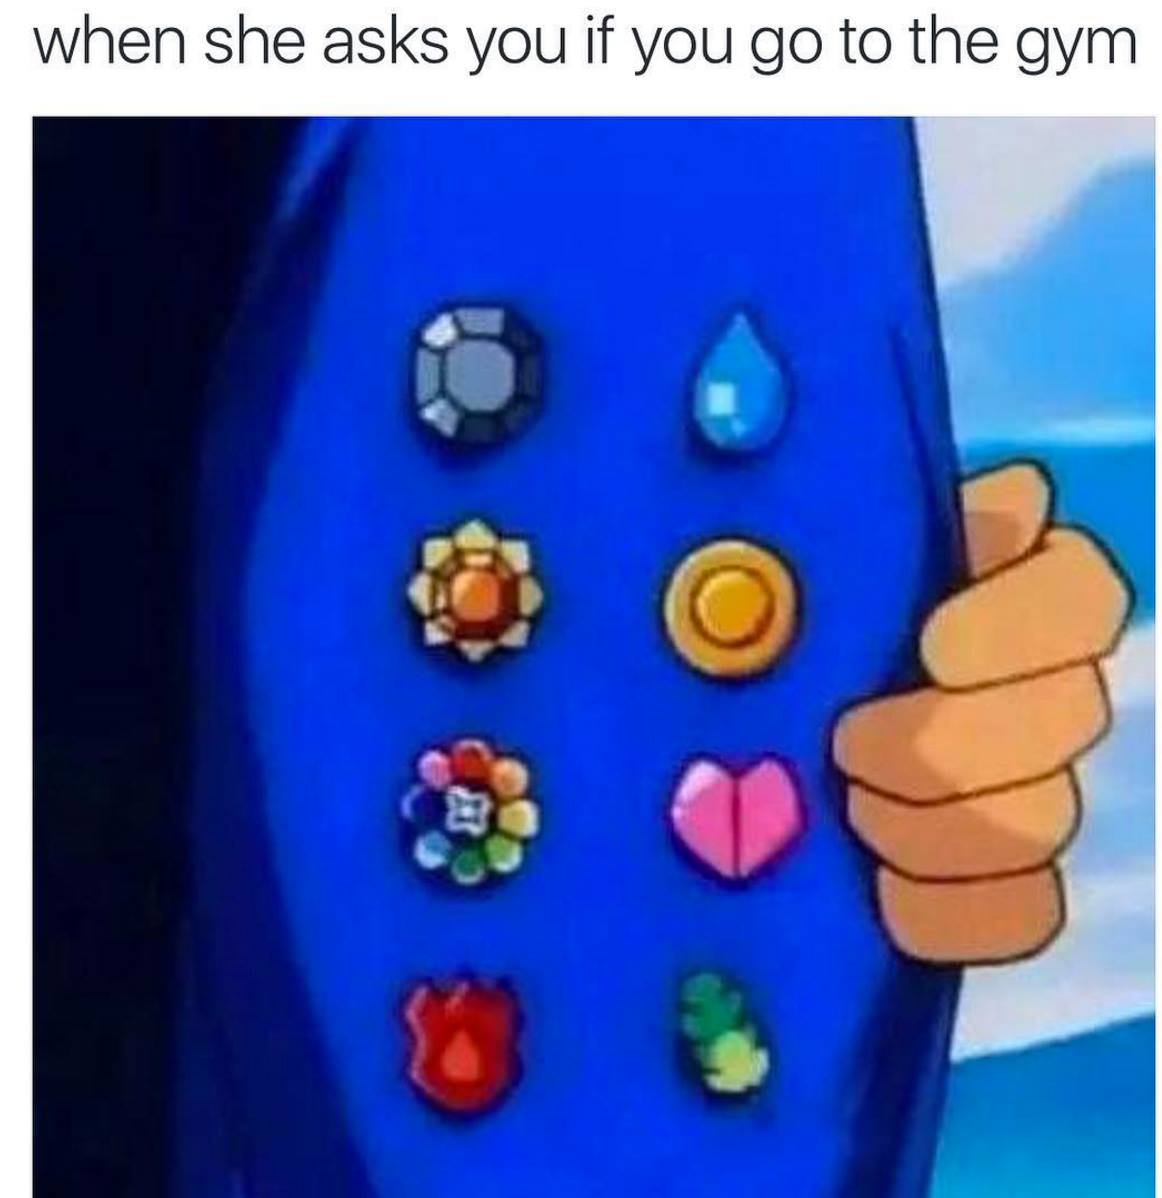 she asks if you go - when she asks you if you go to the gym